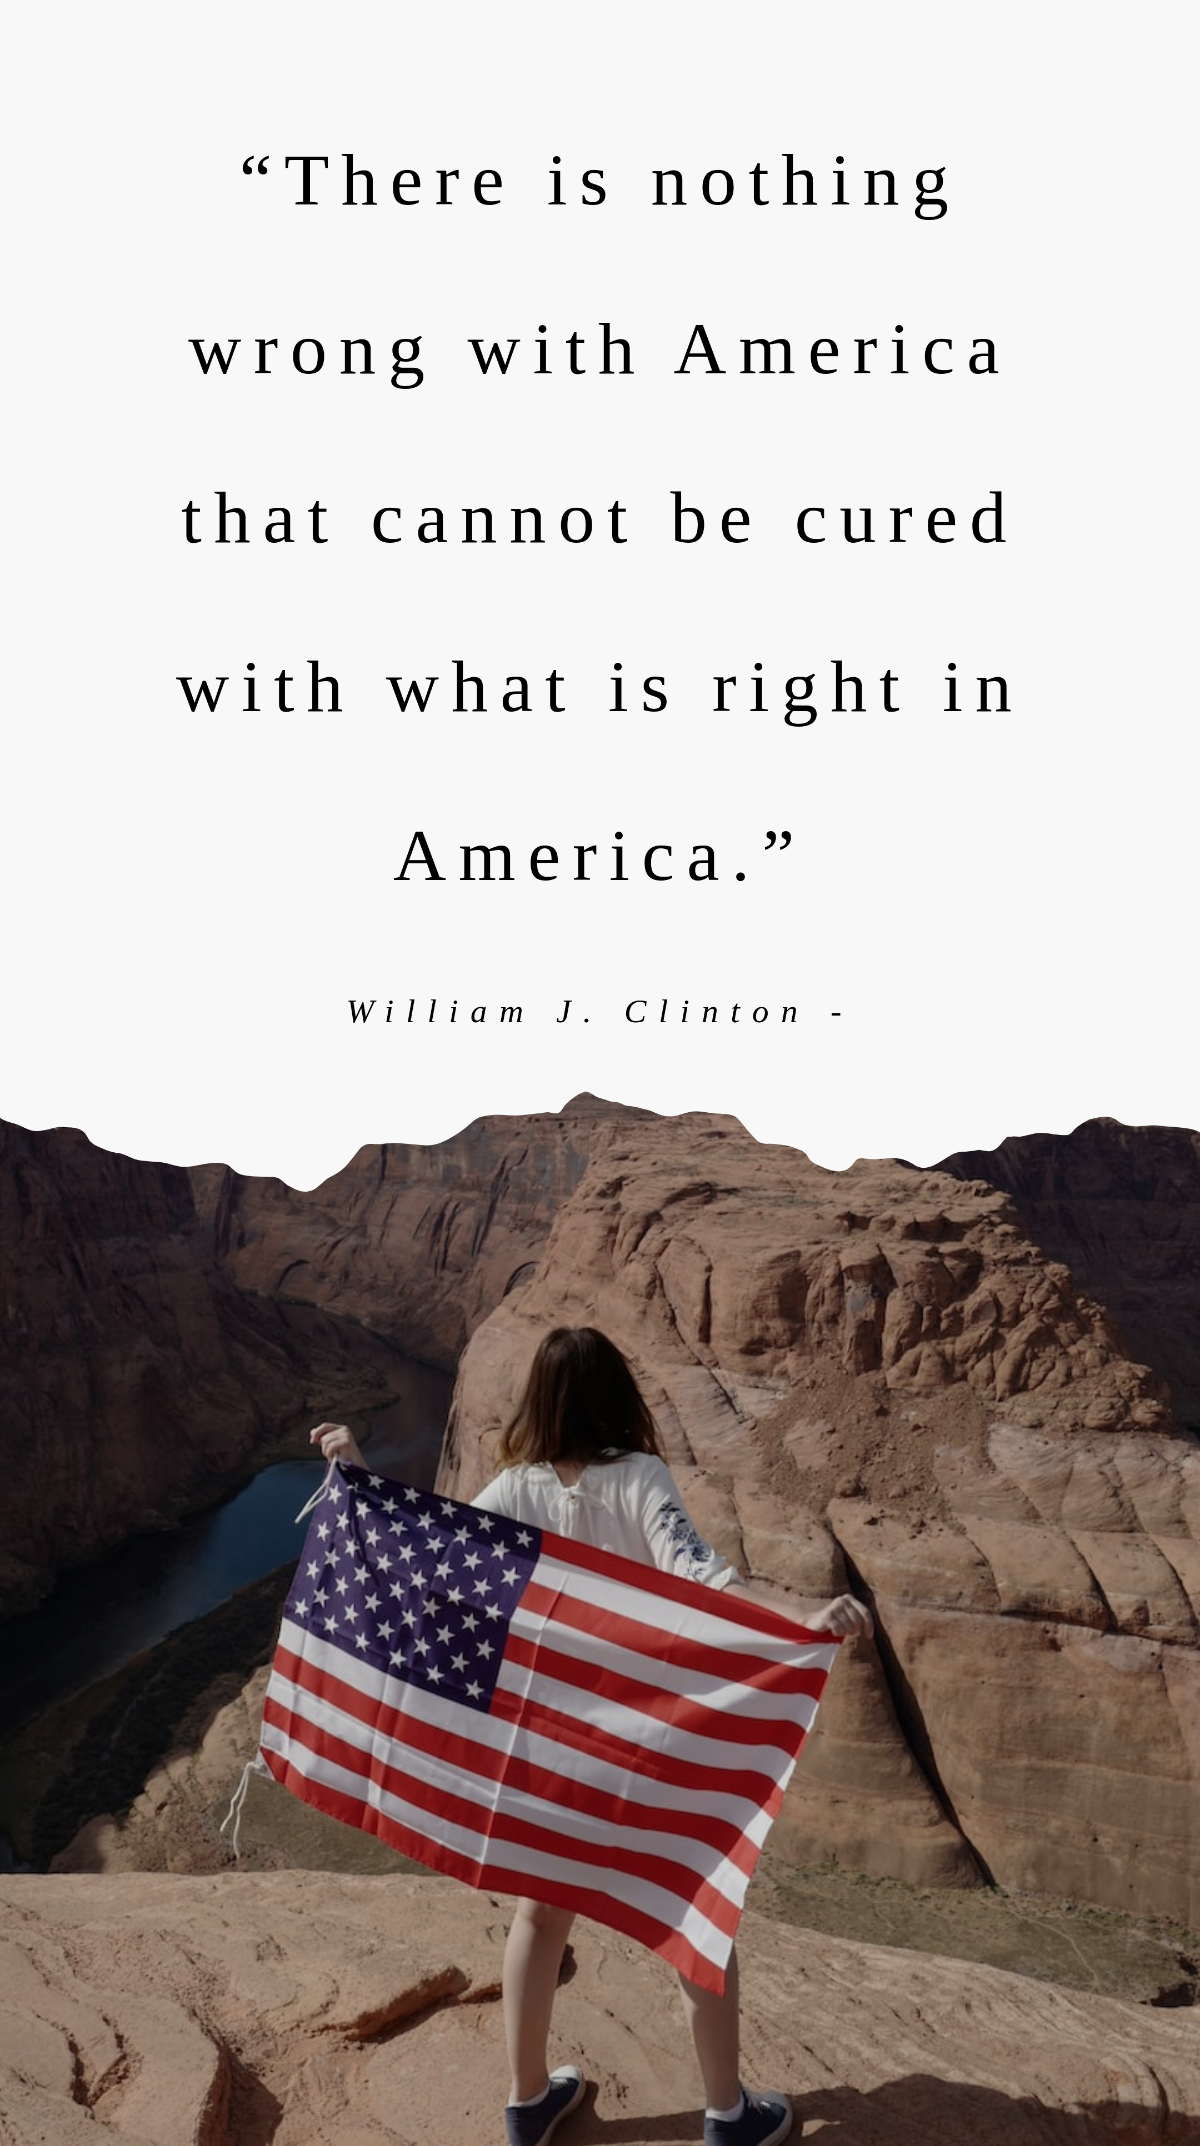 William J. Clinton - “There is nothing wrong with America that cannot be cured with what is right in America.” Template